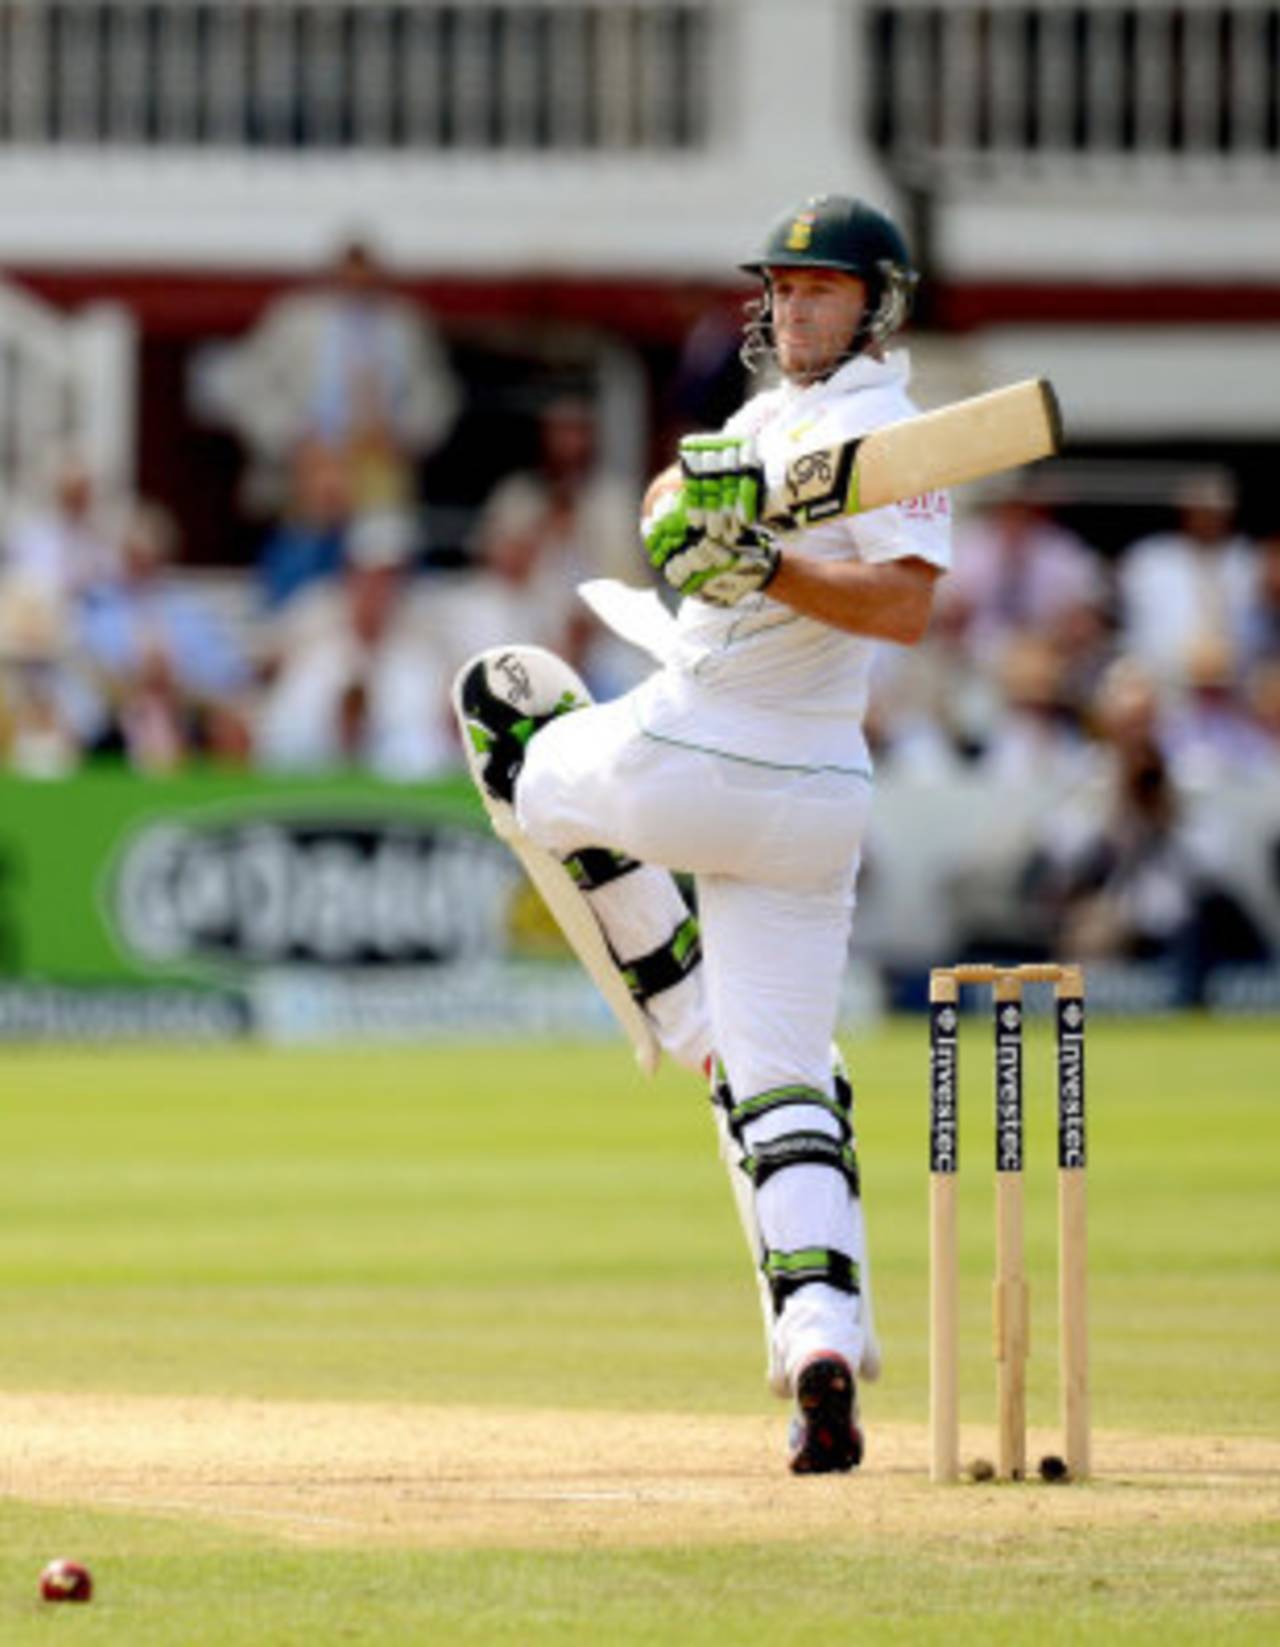 AB de Villiers helped South Africa put on 95 for the fifth wicket, England v South Africa, 3rd Investec Test, Lord's, 4th day, August 19, 2012